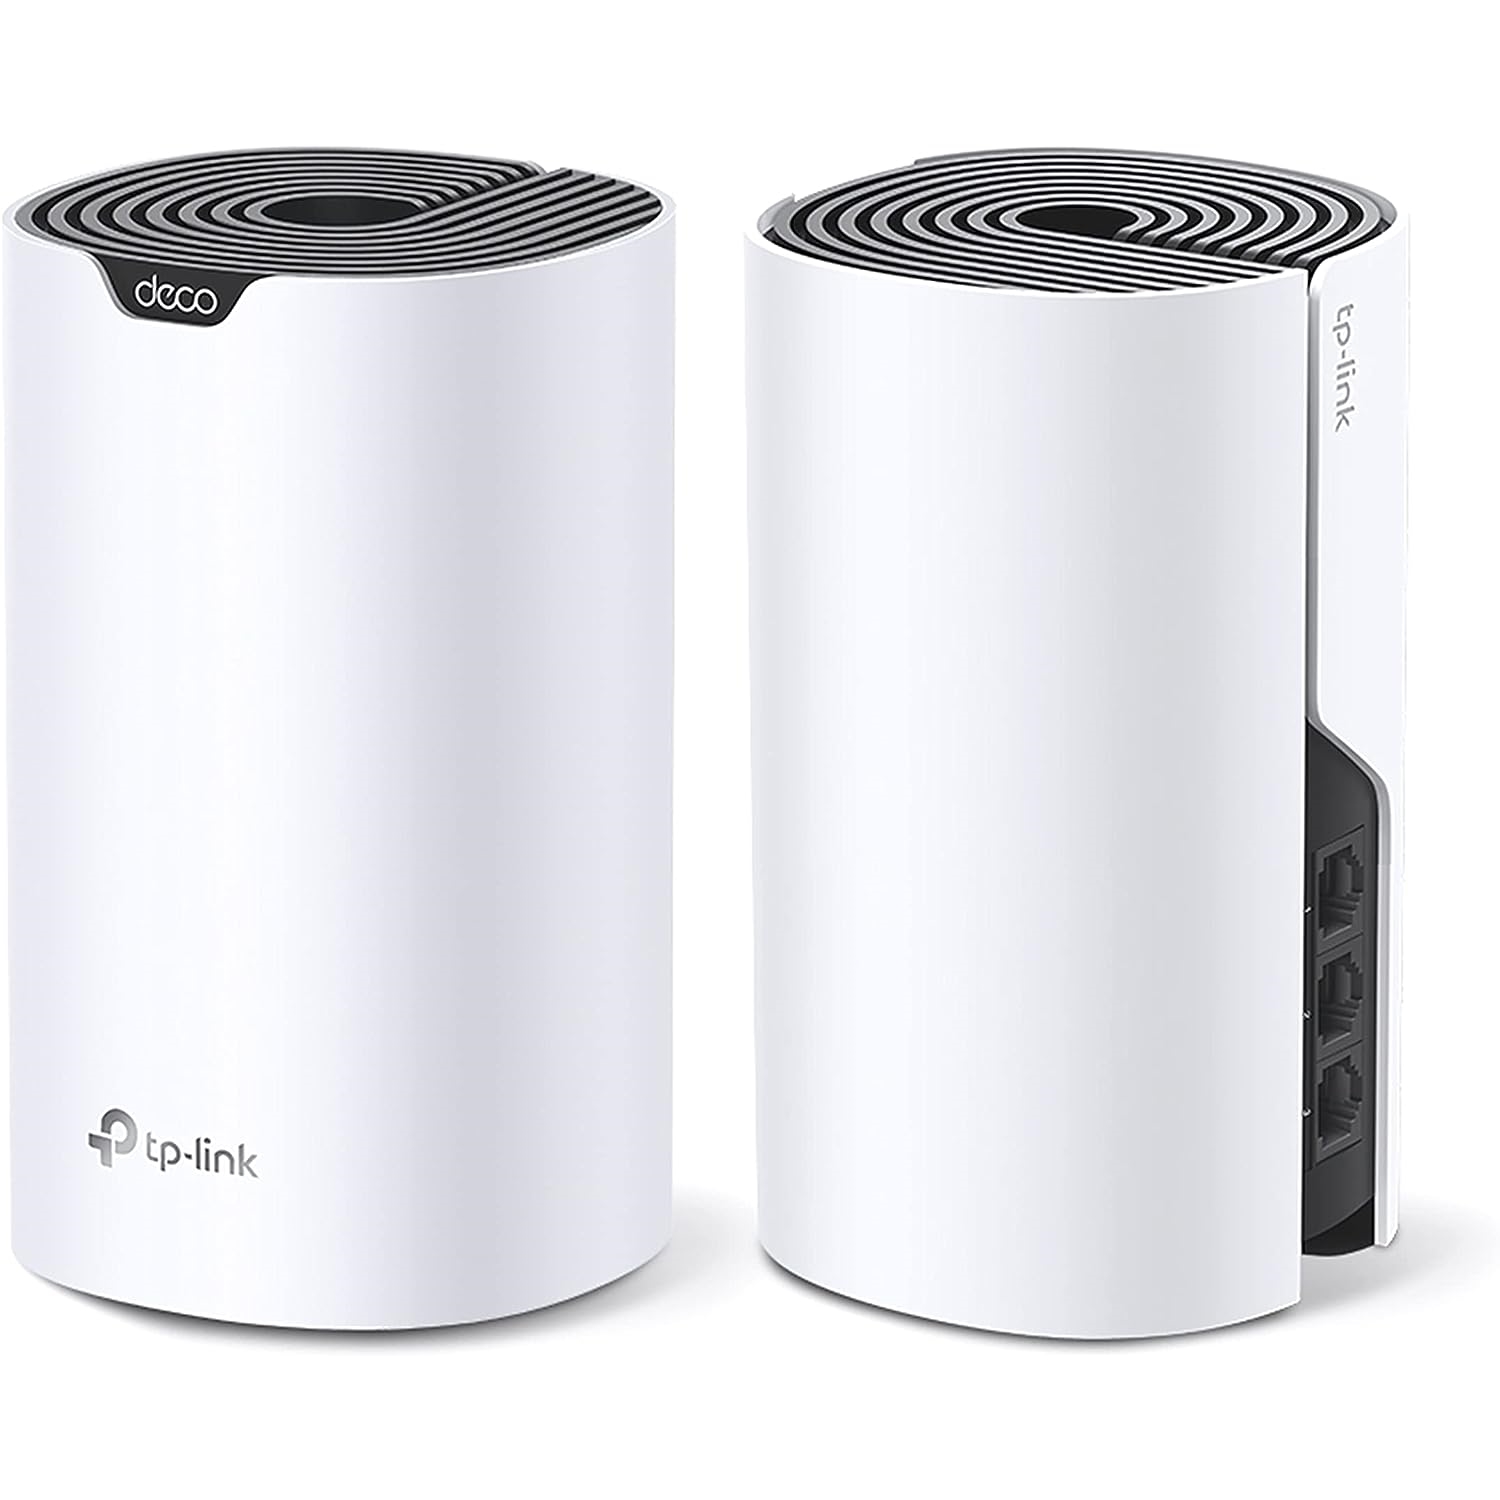 TP-LINK%20DECO%20S7(2-PACK)%20AC1900%20DUALBAND%20WHOLE%20HOME%20MESH%20ACCESS%20POINT